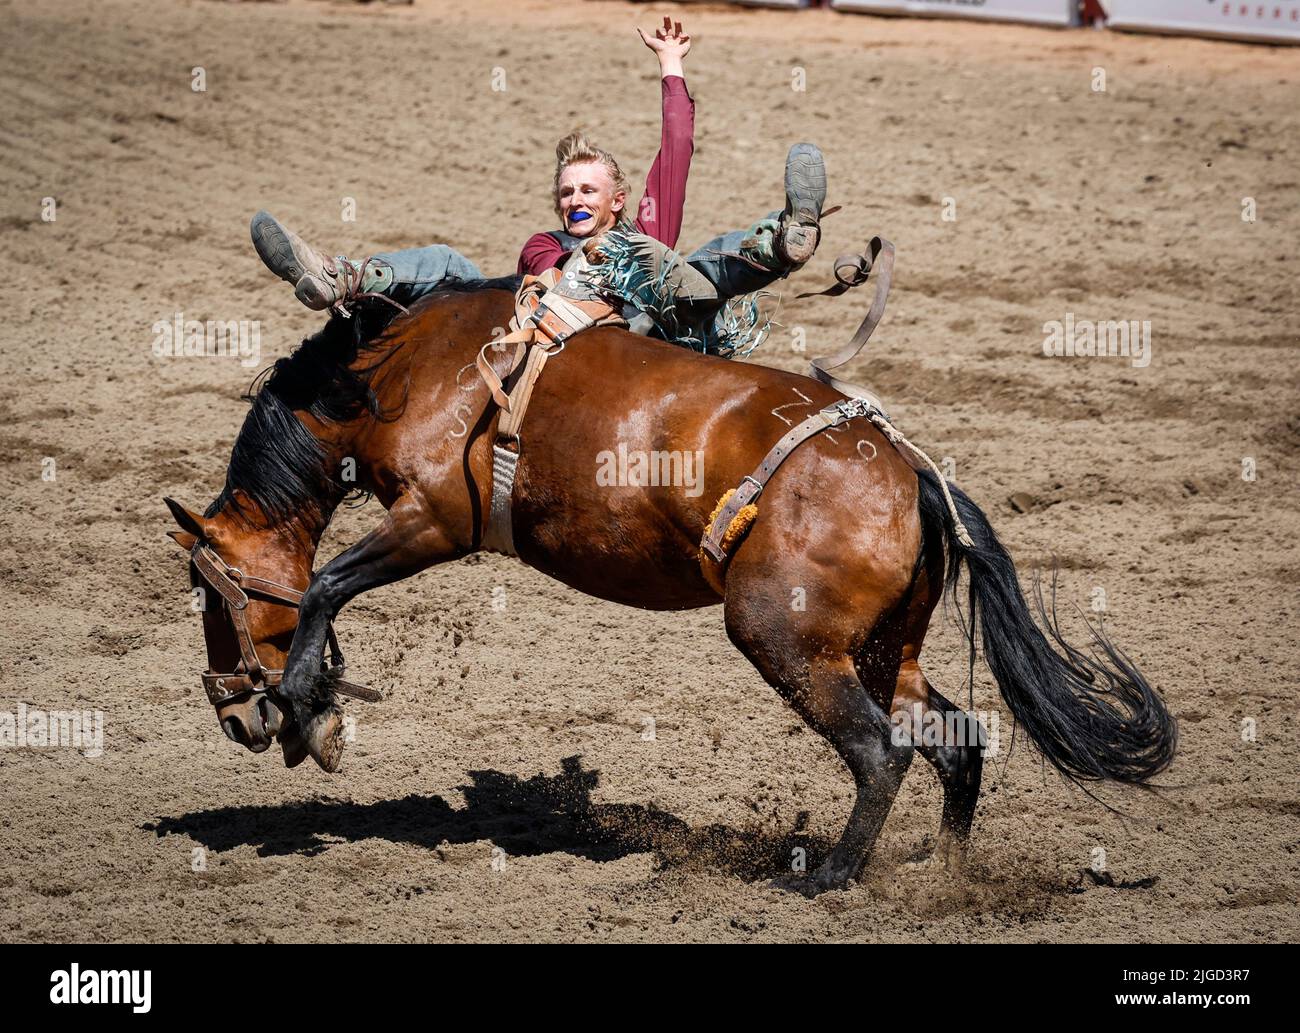 July 9, 2022, Calgary, AB, CANADA: Chase McNulty, of Biggar, Sask., comes off Approaching Carma during novice bareback rodeo action at the Calgary Stampede in Calgary, Alta., Saturday, July 9, 2022. (Credit Image: © Jeff Mcintosh/The Canadian Press via ZUMA Press) Stock Photo